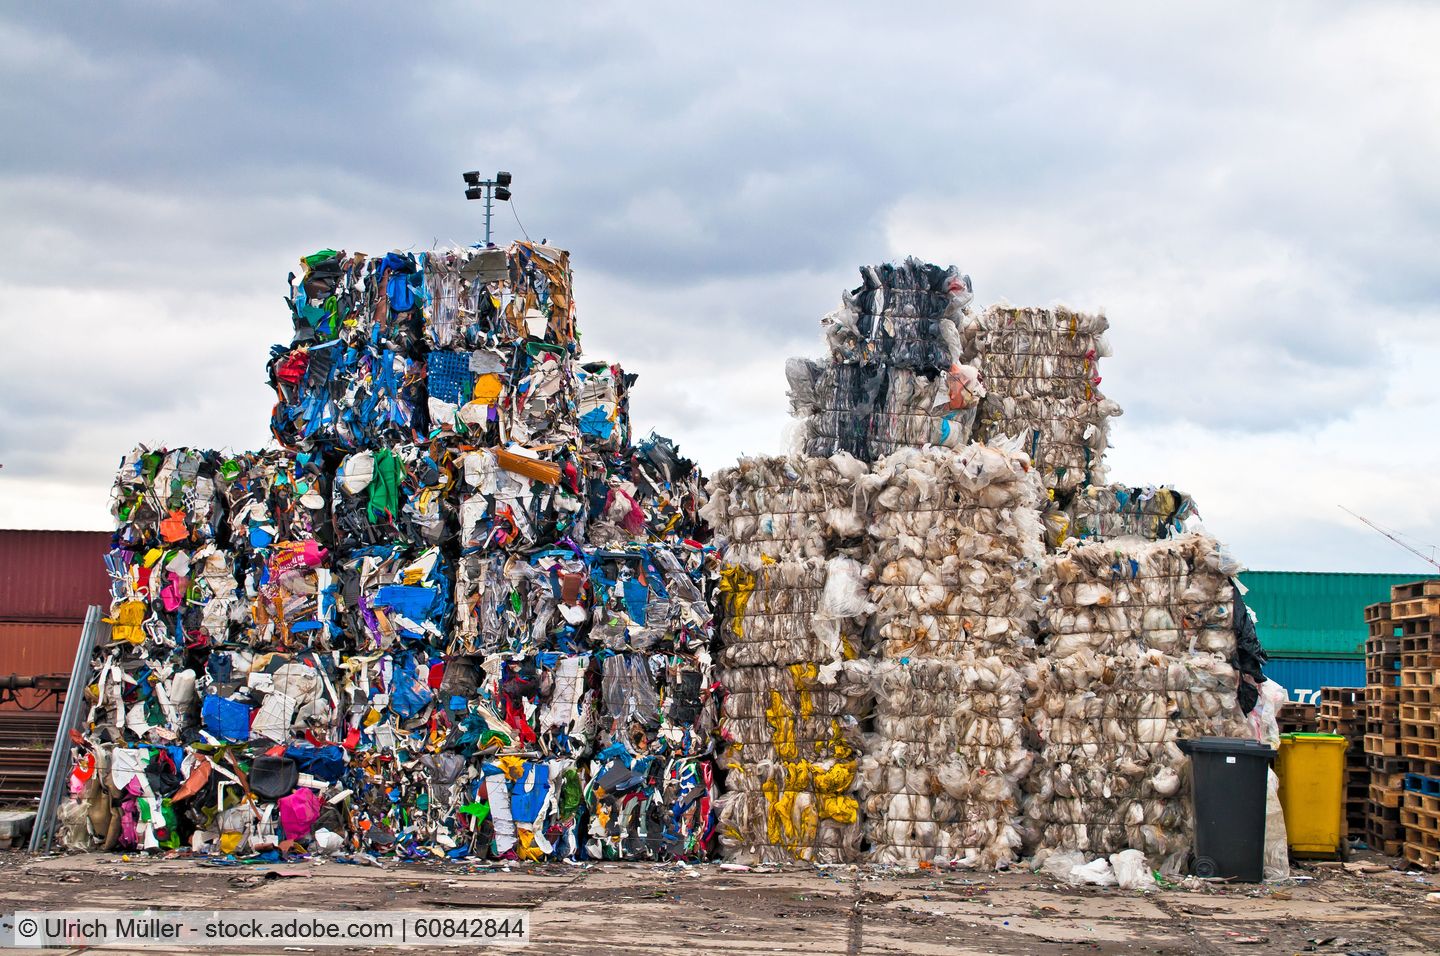 stacked bales of waste plastics against a cloudy sky